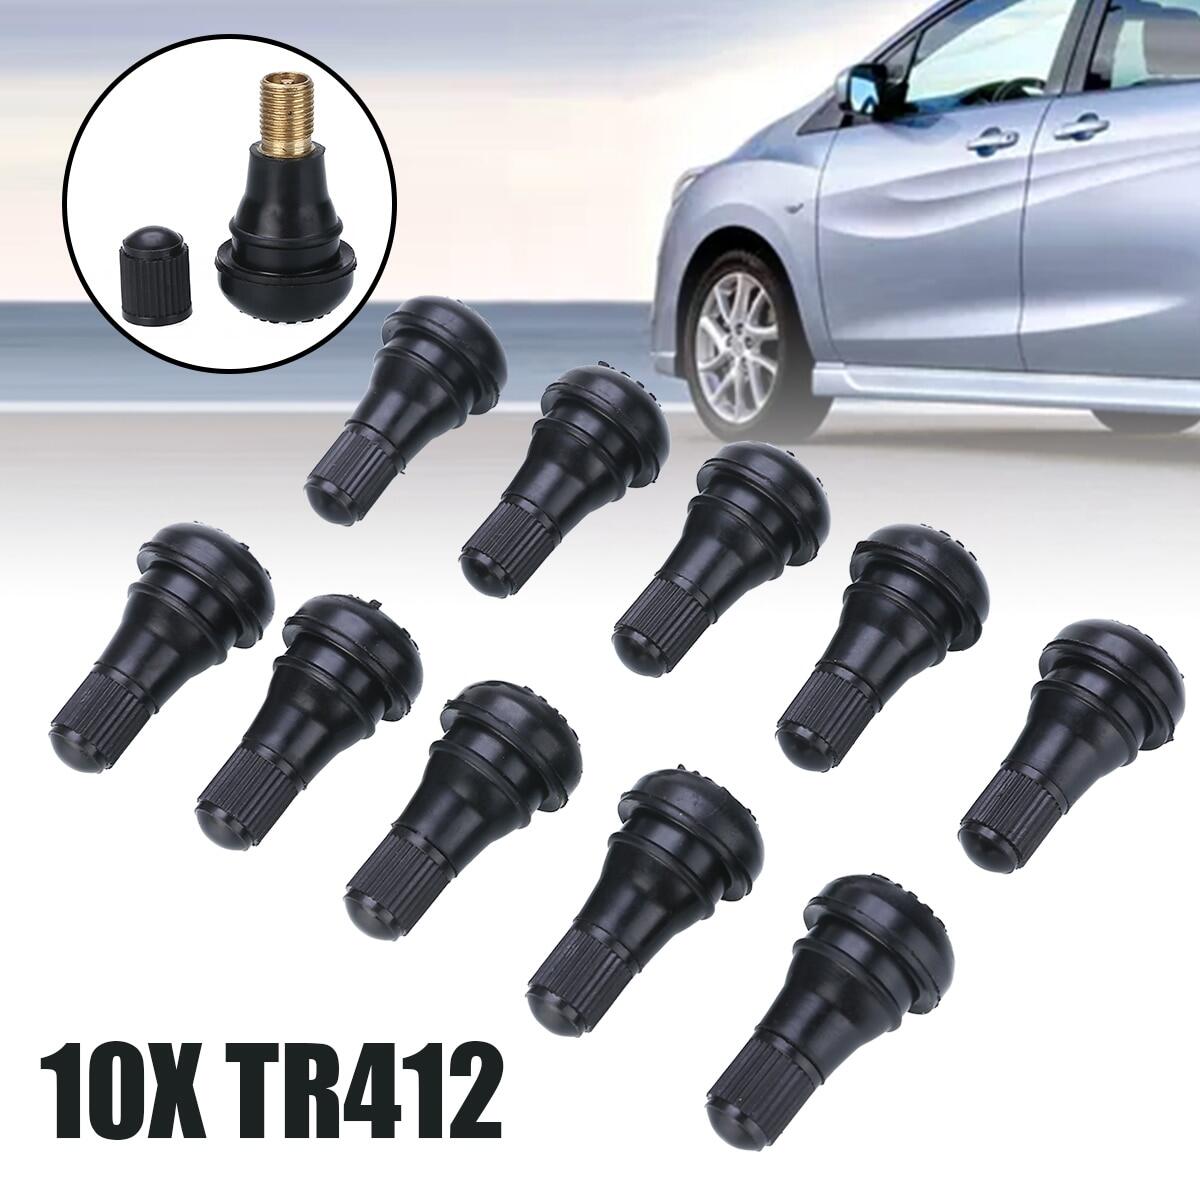 10pcs TR412 Short Tubeless Snap-in Vavle Black Rubber Tyre Valve Stems Moped Motorcycle Car Quad for Wheels Tires Parts